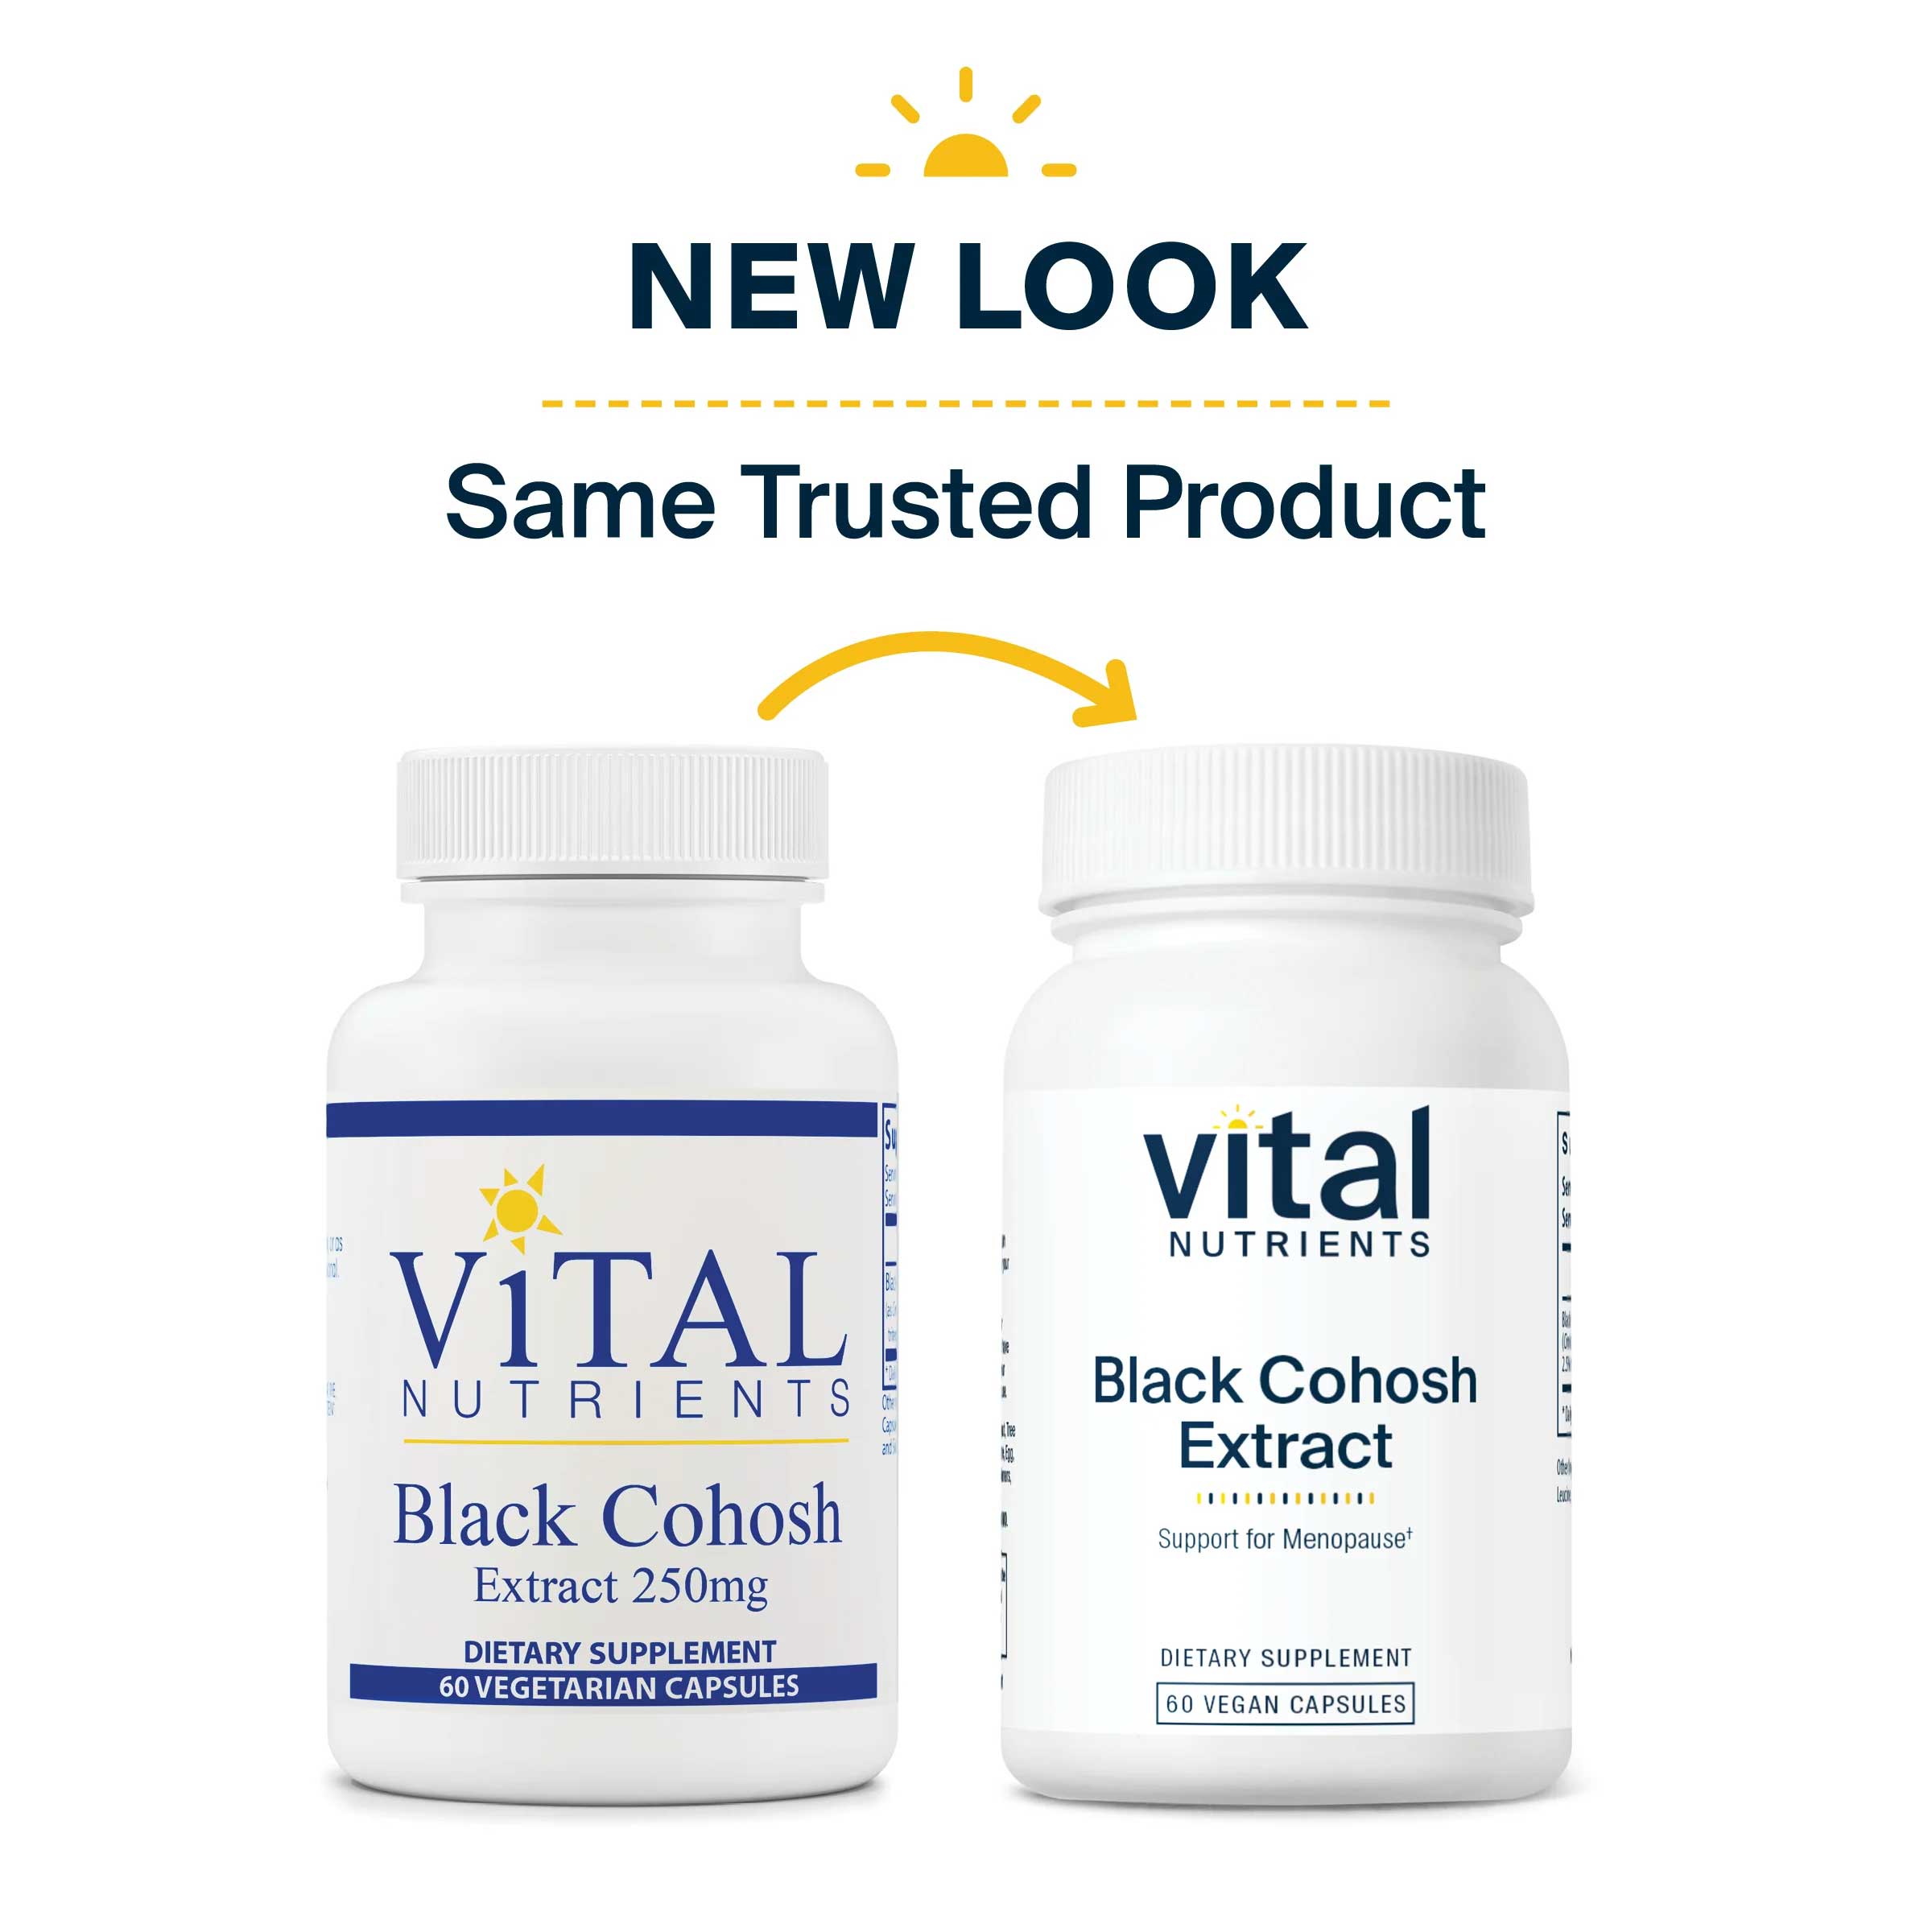 Vital Nutrients Black Cohosh Extract 250mg New Look